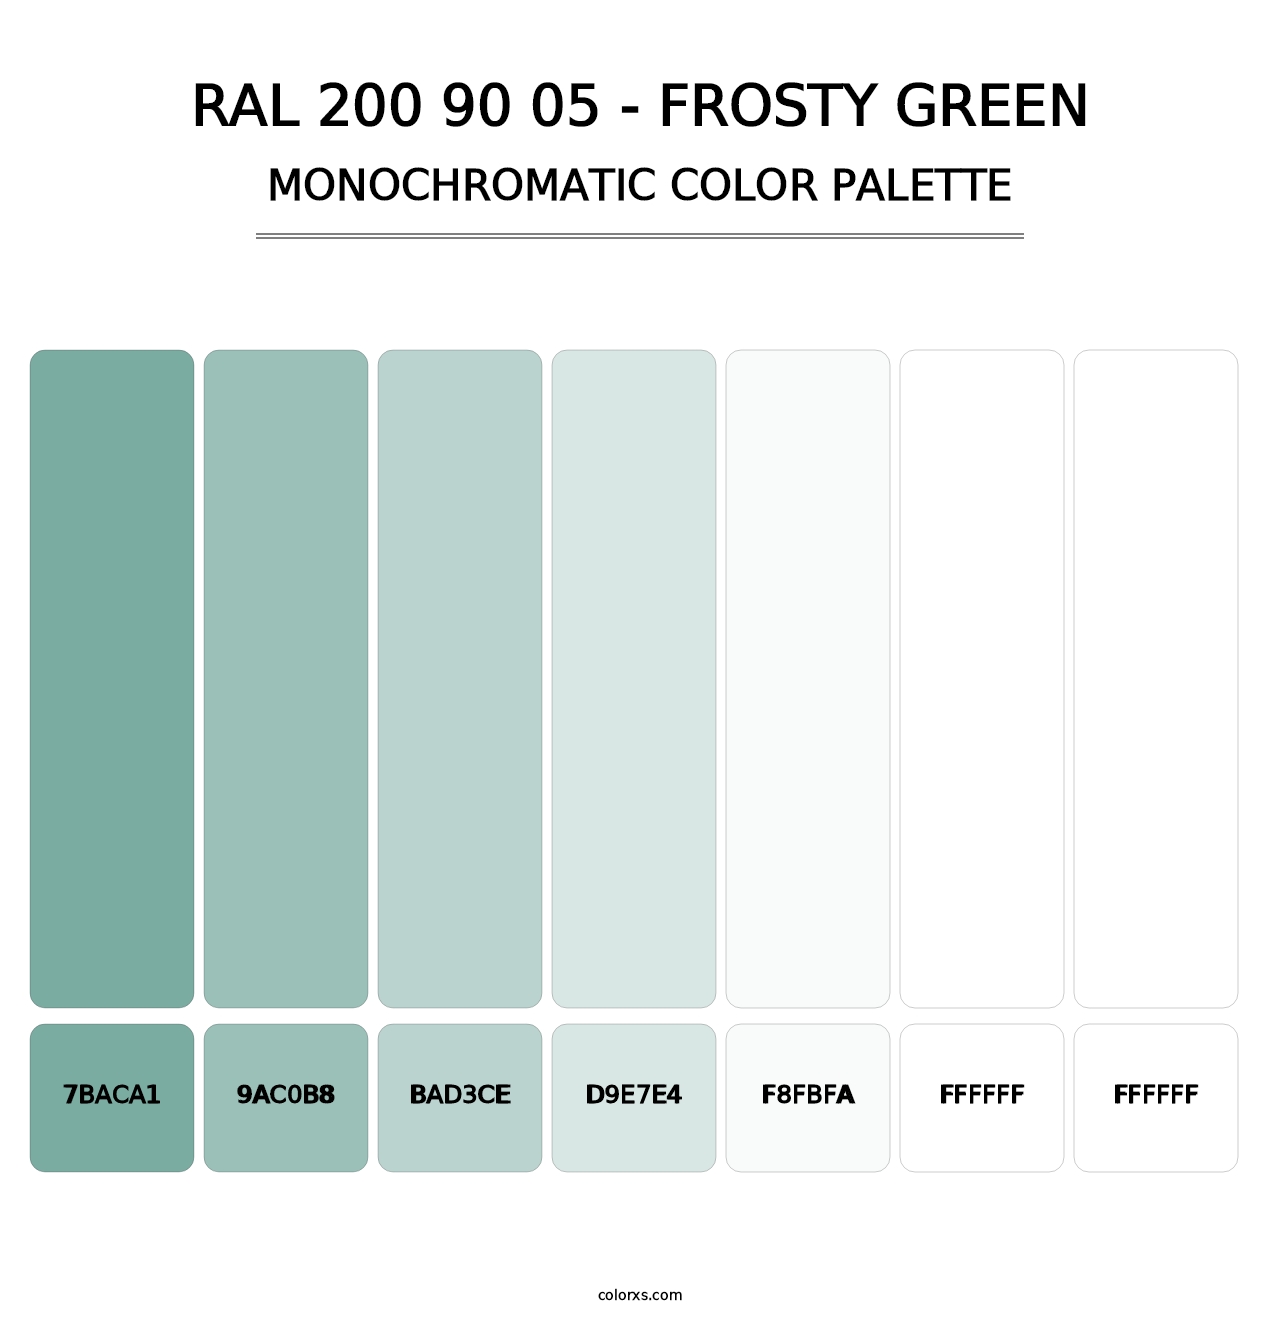 RAL 200 90 05 - Frosty Green - Monochromatic Color Palette